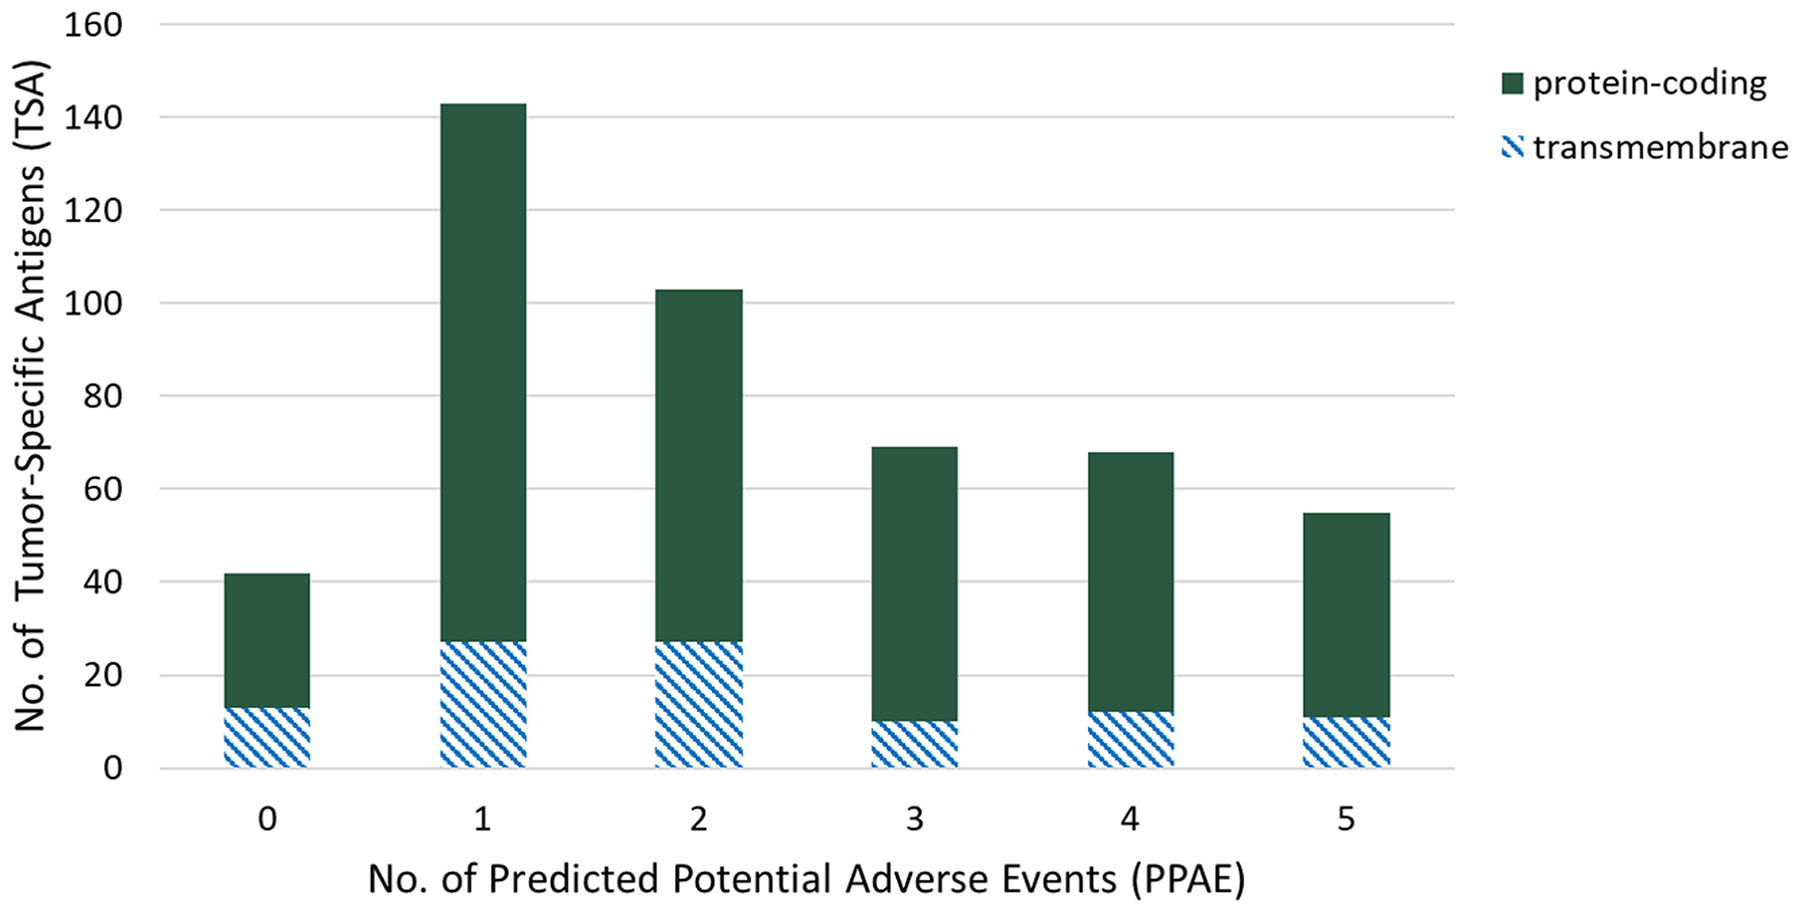 Distribution of tumor-specific antigens (TSAs, y-axis) of predicted potential adverse events (PPAEs, x-axis) and classes of target types.